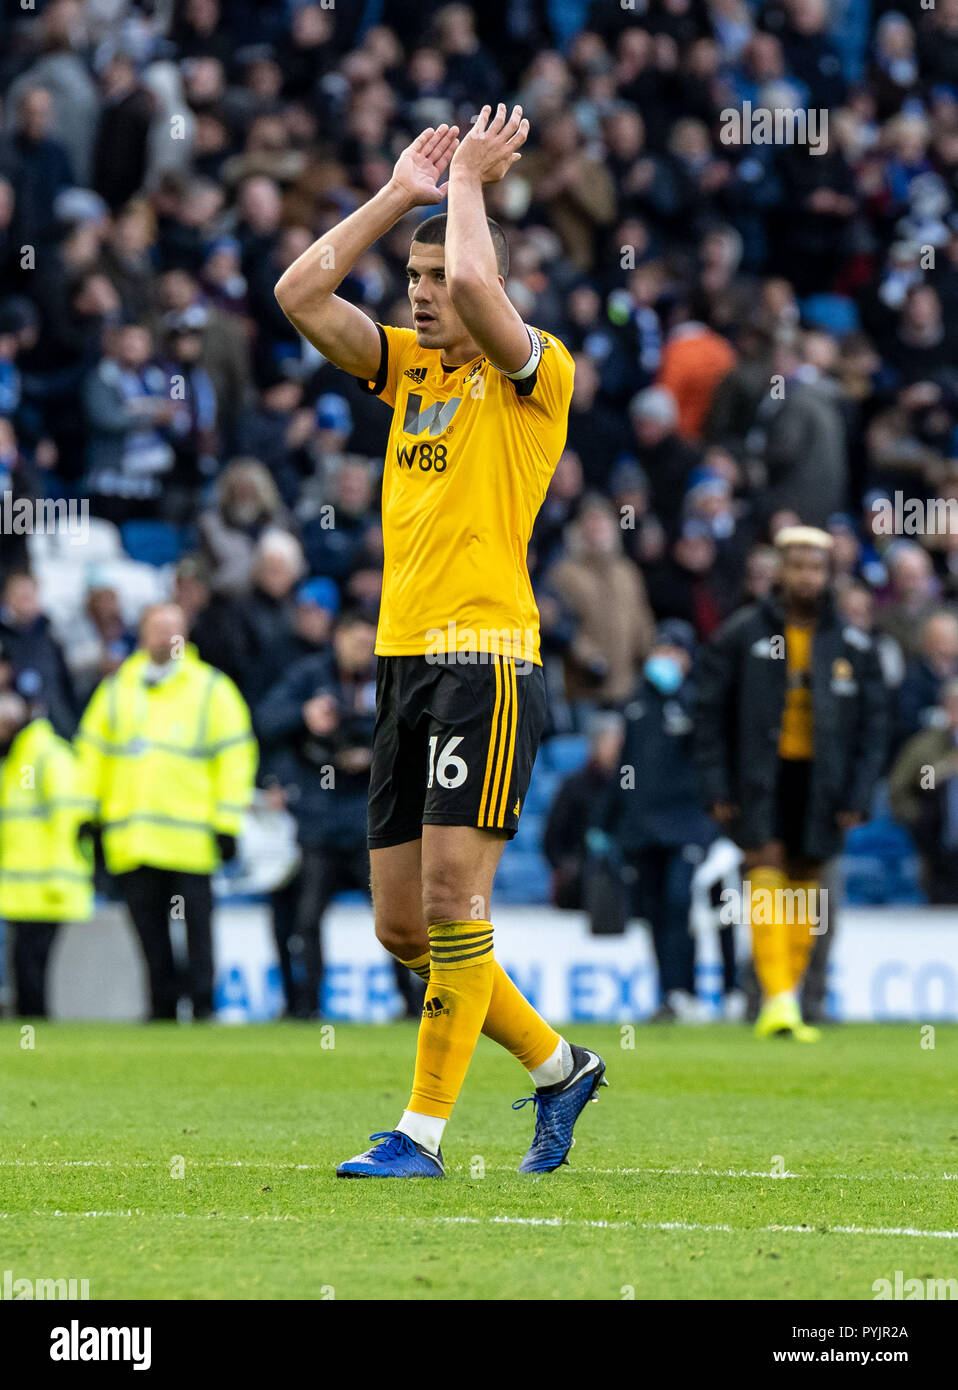 Brighton, UK. 27th Oct 2018. Conor Coady of Wolverhampton Wanderers during the Premier League match between Brighton and Hove Albion and Wolverhampton Wanderers at the AMEX Stadium, Brighton, England on 27 October 2018. Photo by Liam McAvoy. Credit: UK Sports Pics Ltd/Alamy Live News Stock Photo